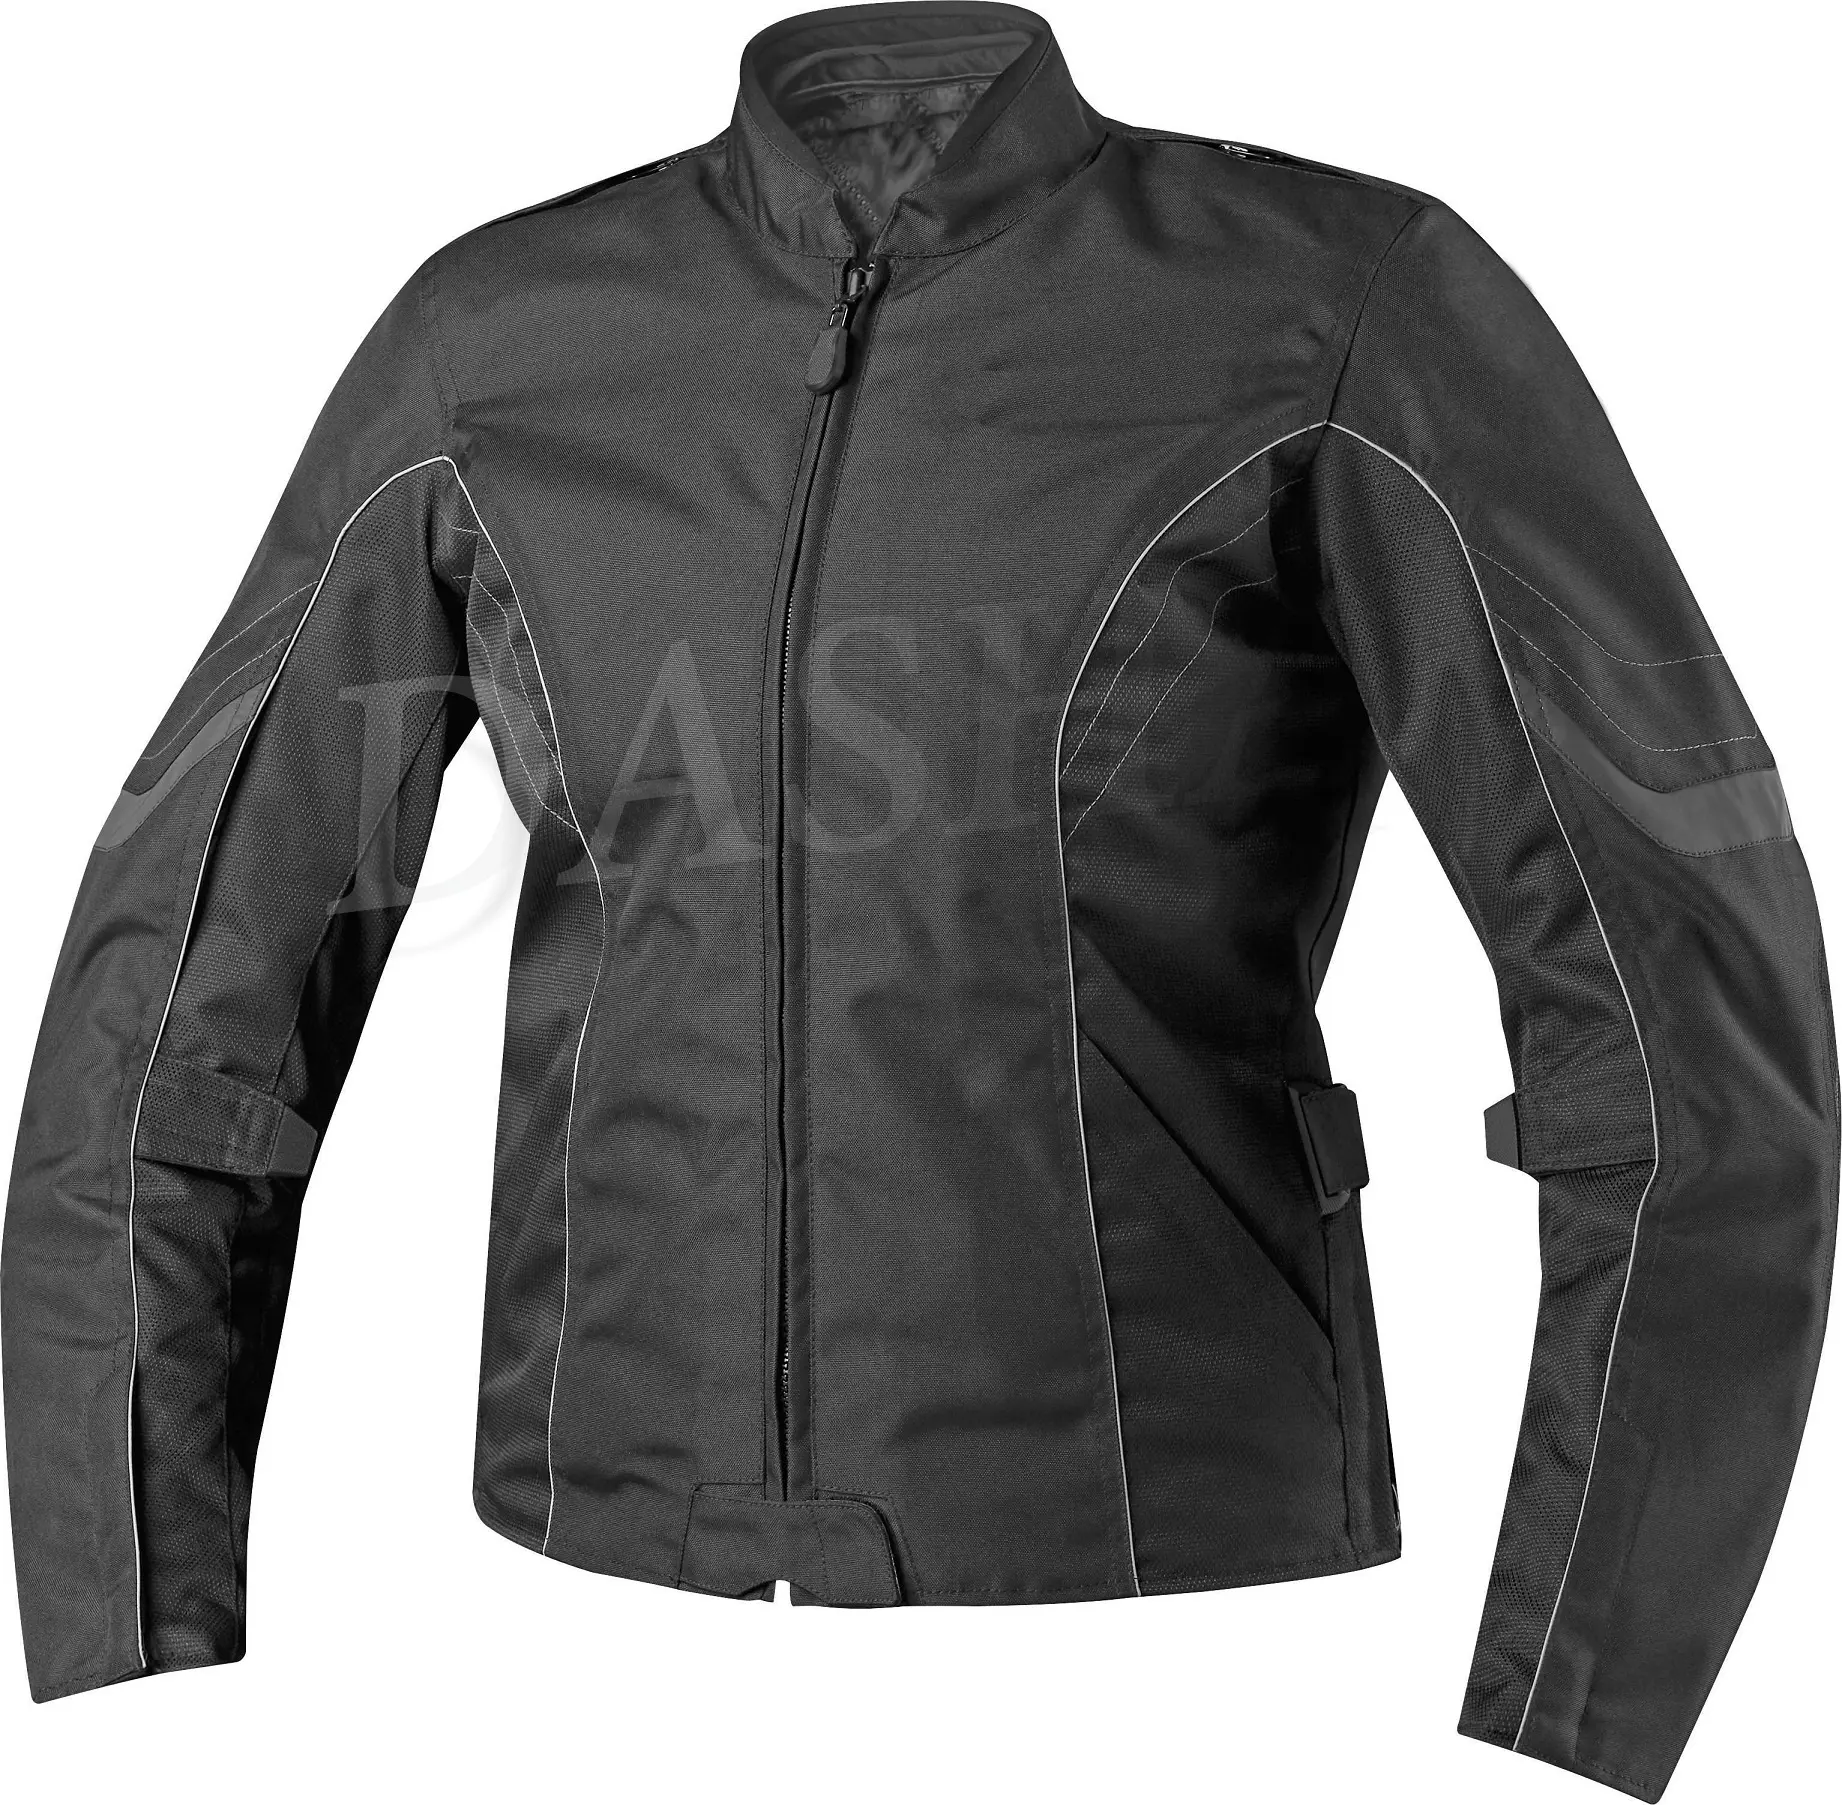 Premium Quality Flank Series Most Popular with High Quality Construction Motorcycle Jacket for Ladies